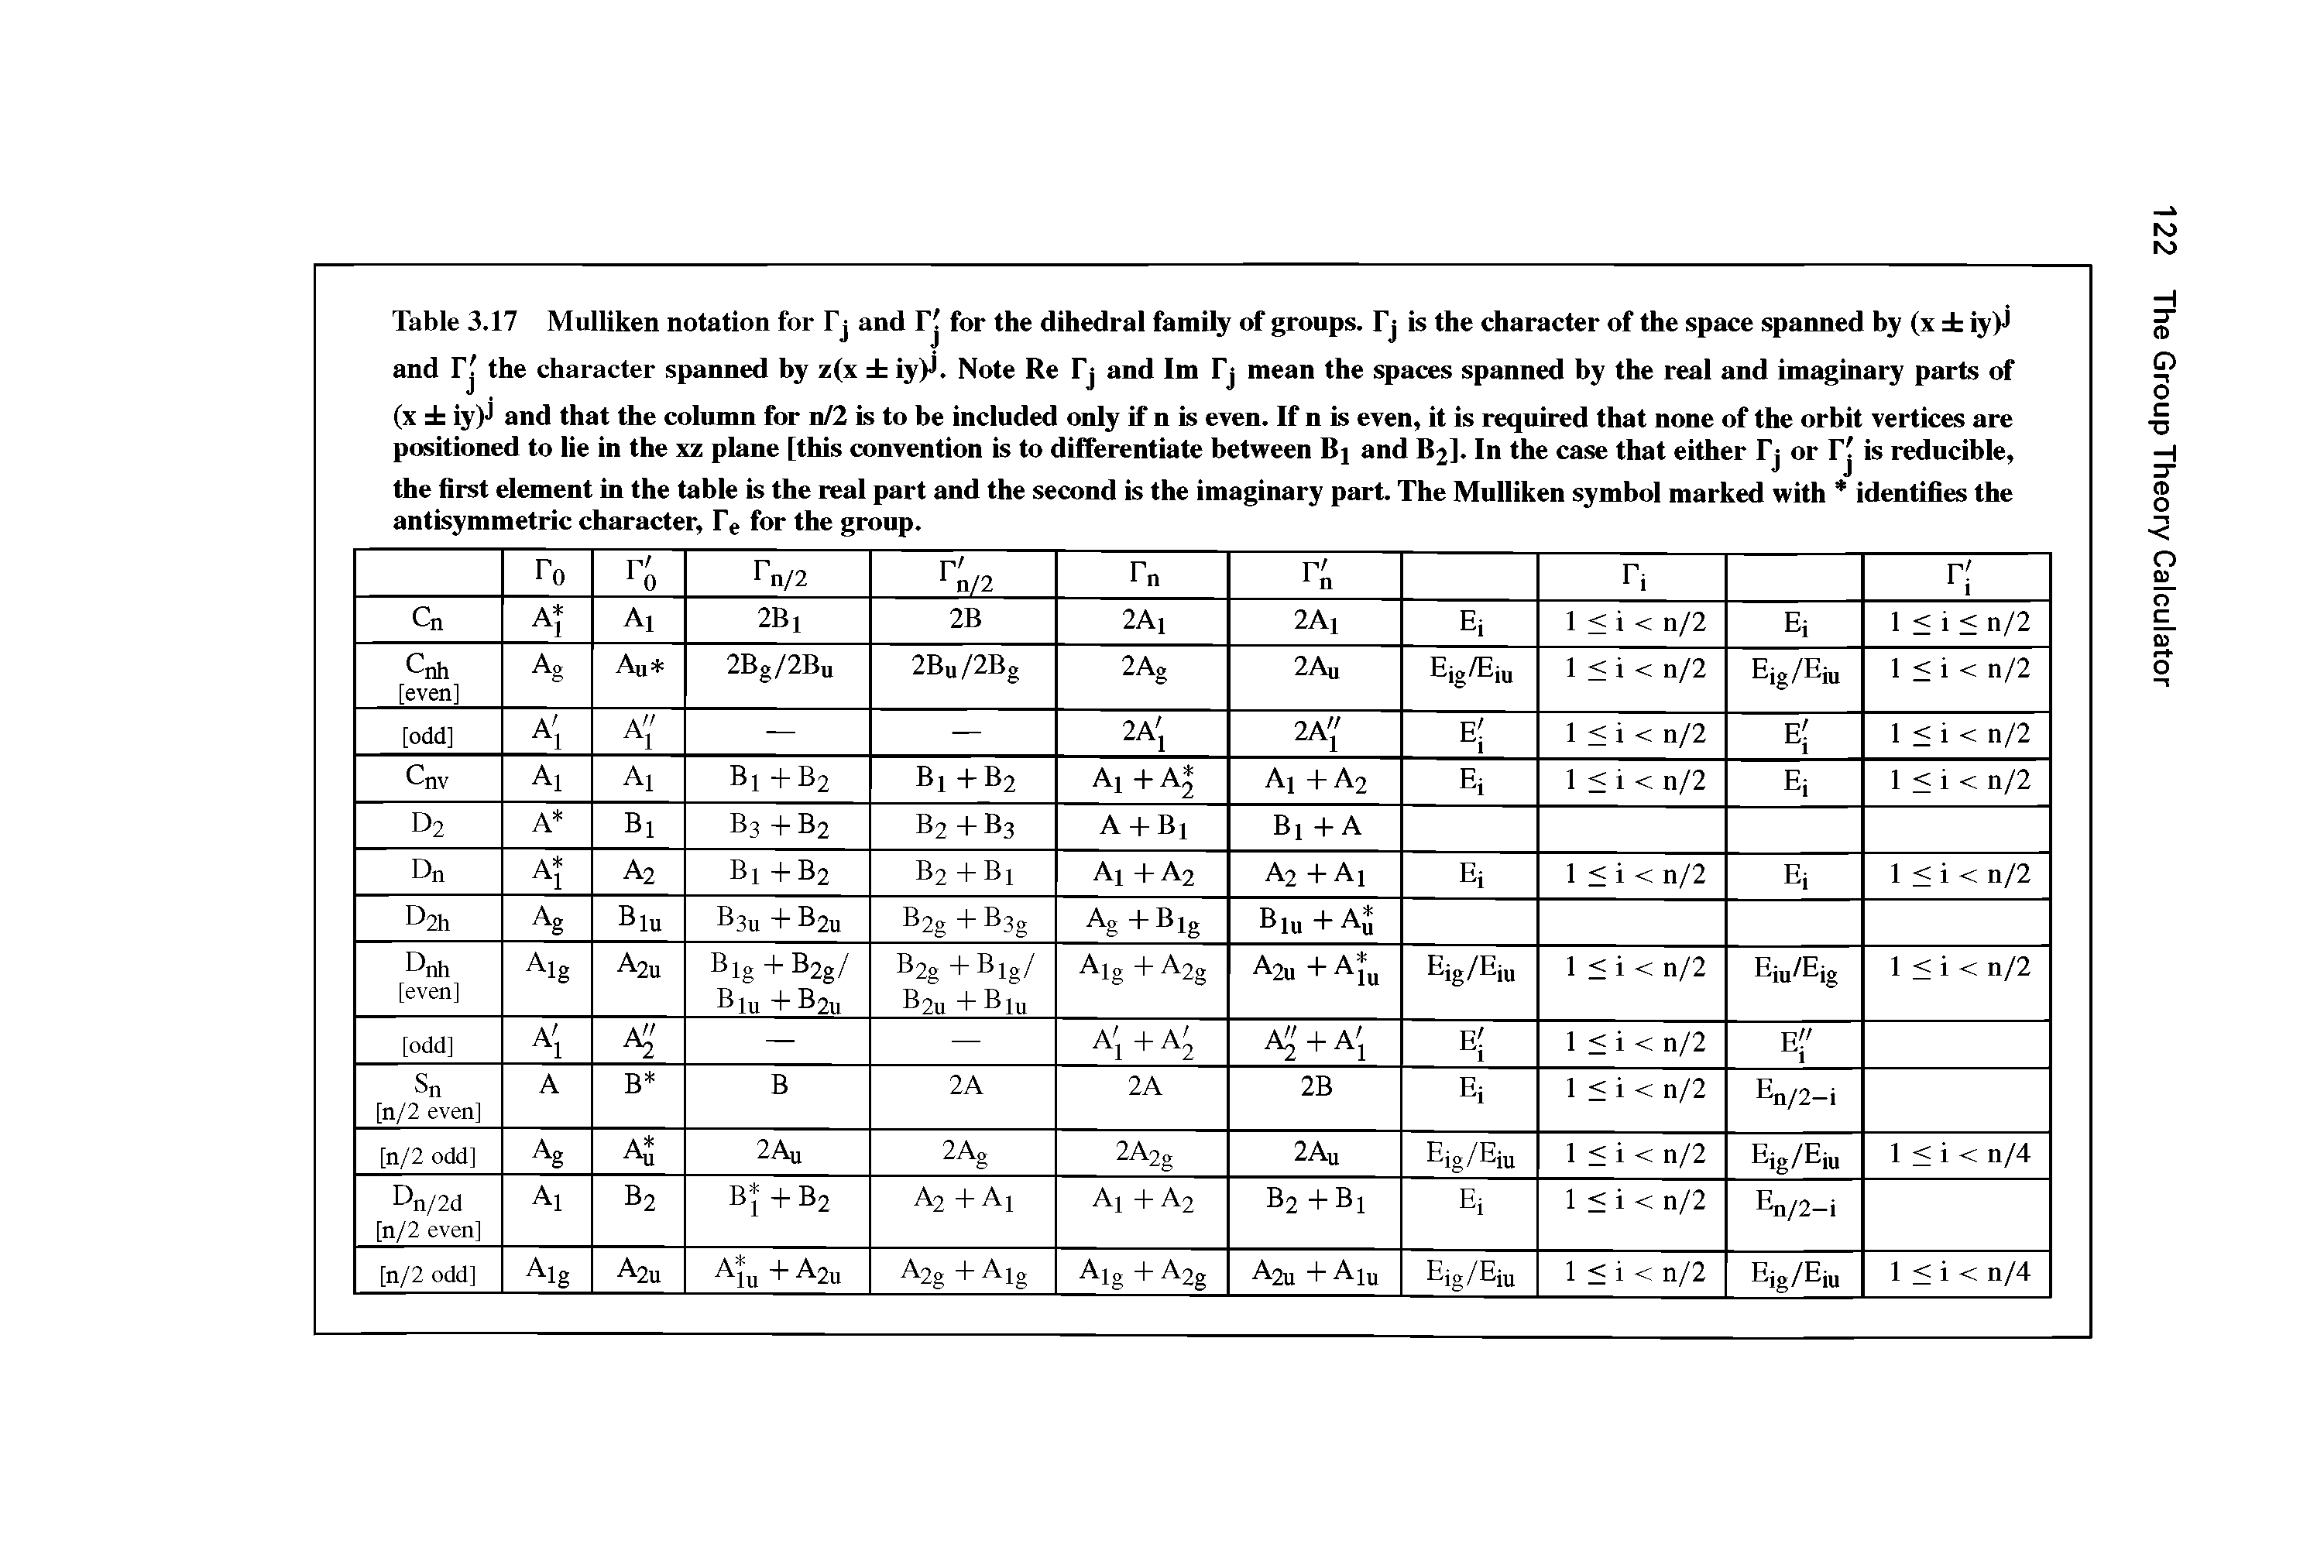 Table 3.17 Mulliken notation for Tj and Tj for the dihedral family of groups. Tj is the character of the space spanned hy (x iy)J...